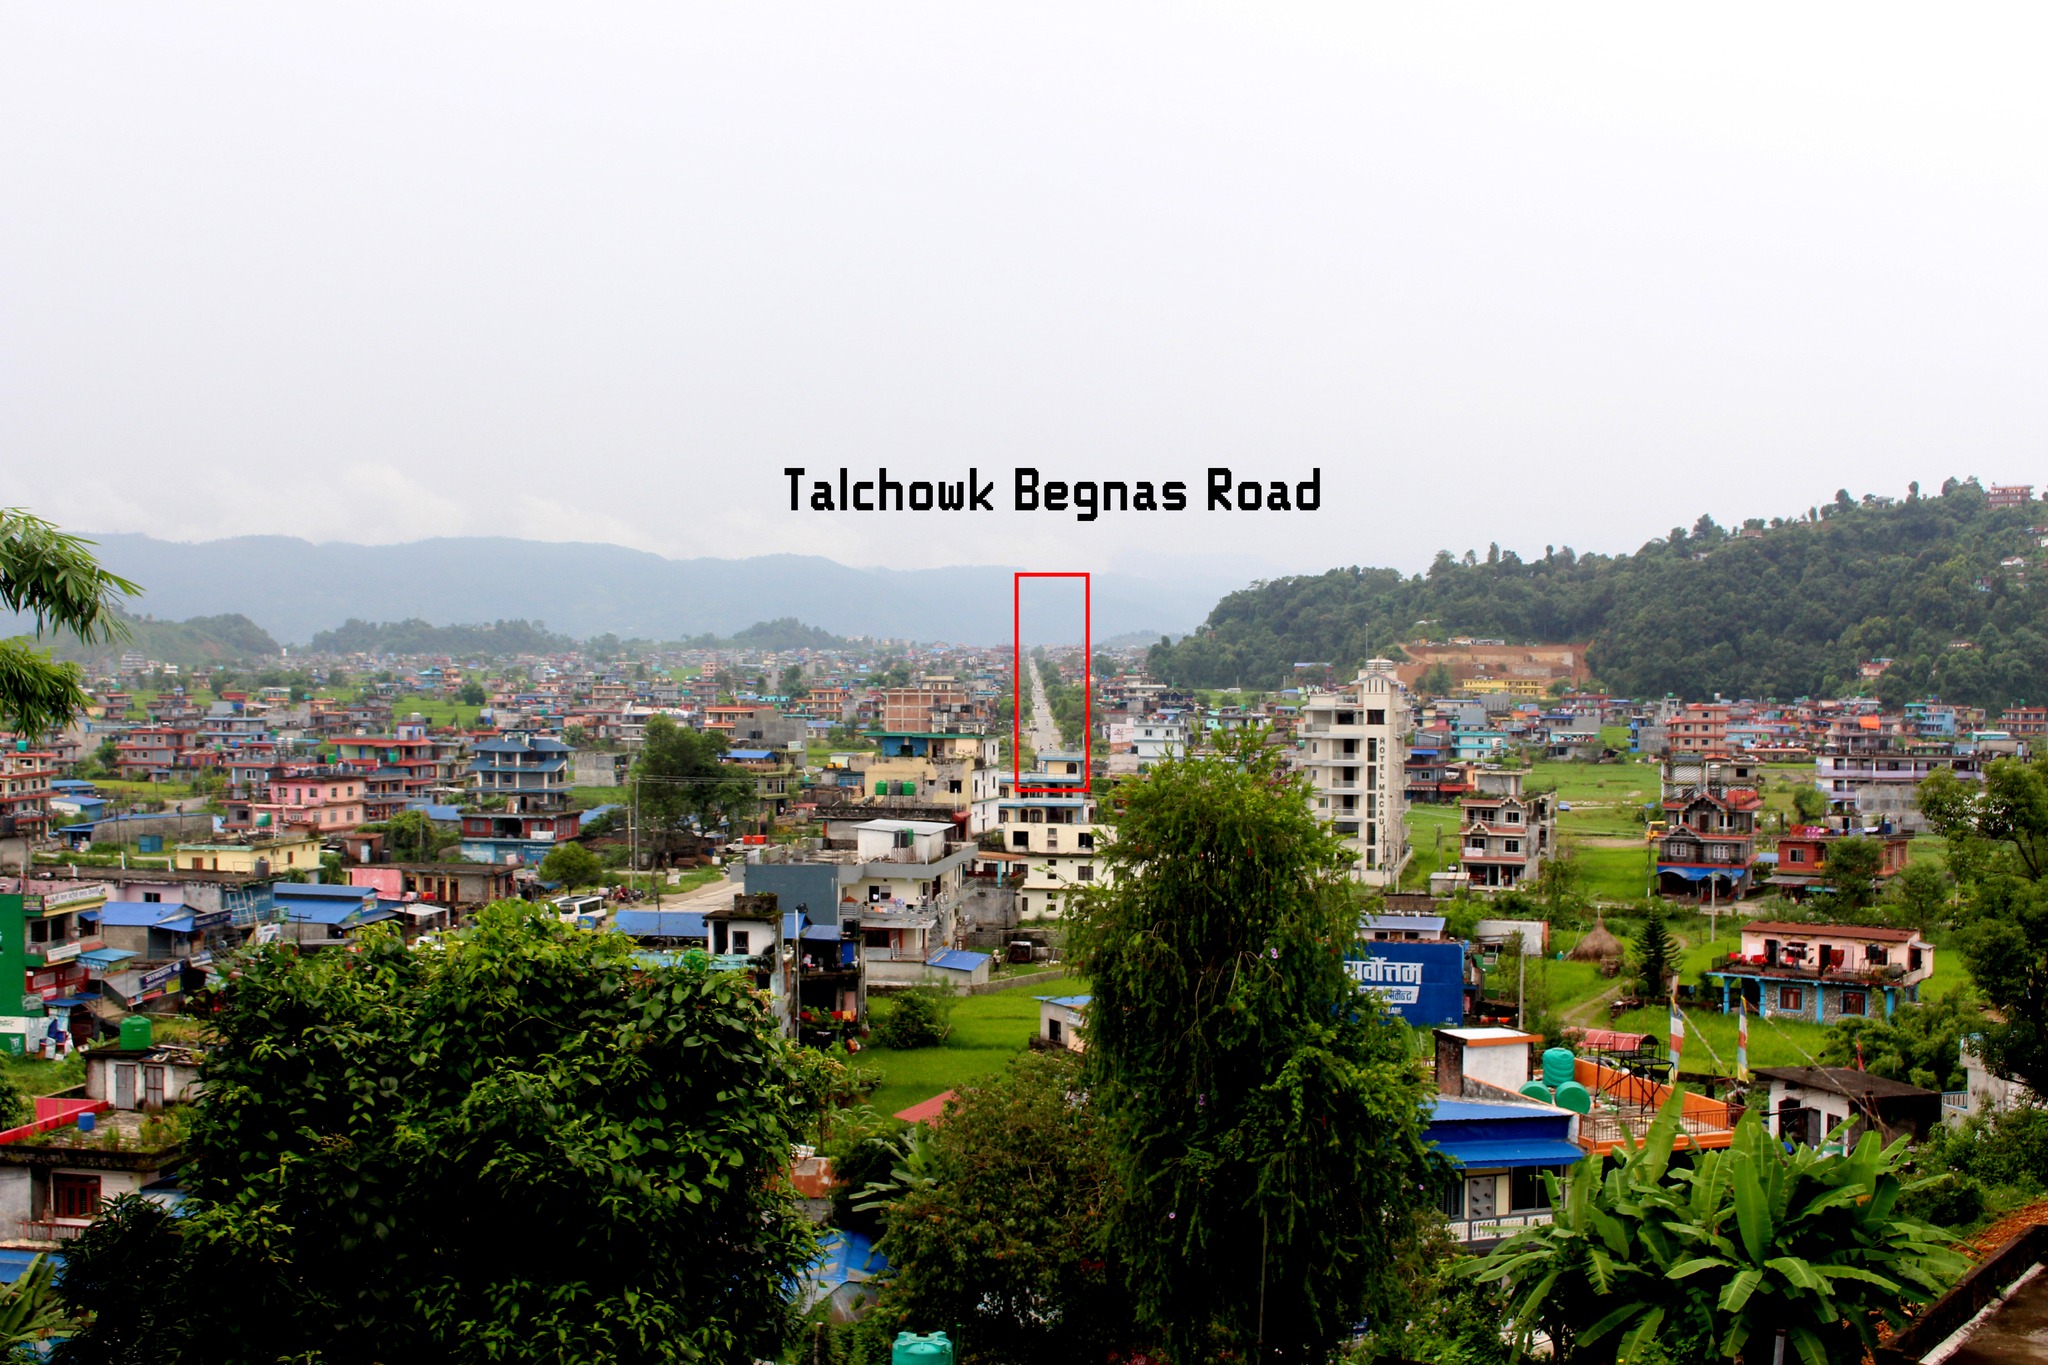 Talchowk-Begnas road becoming a model of Nepal, costing 23 million to build 1 km